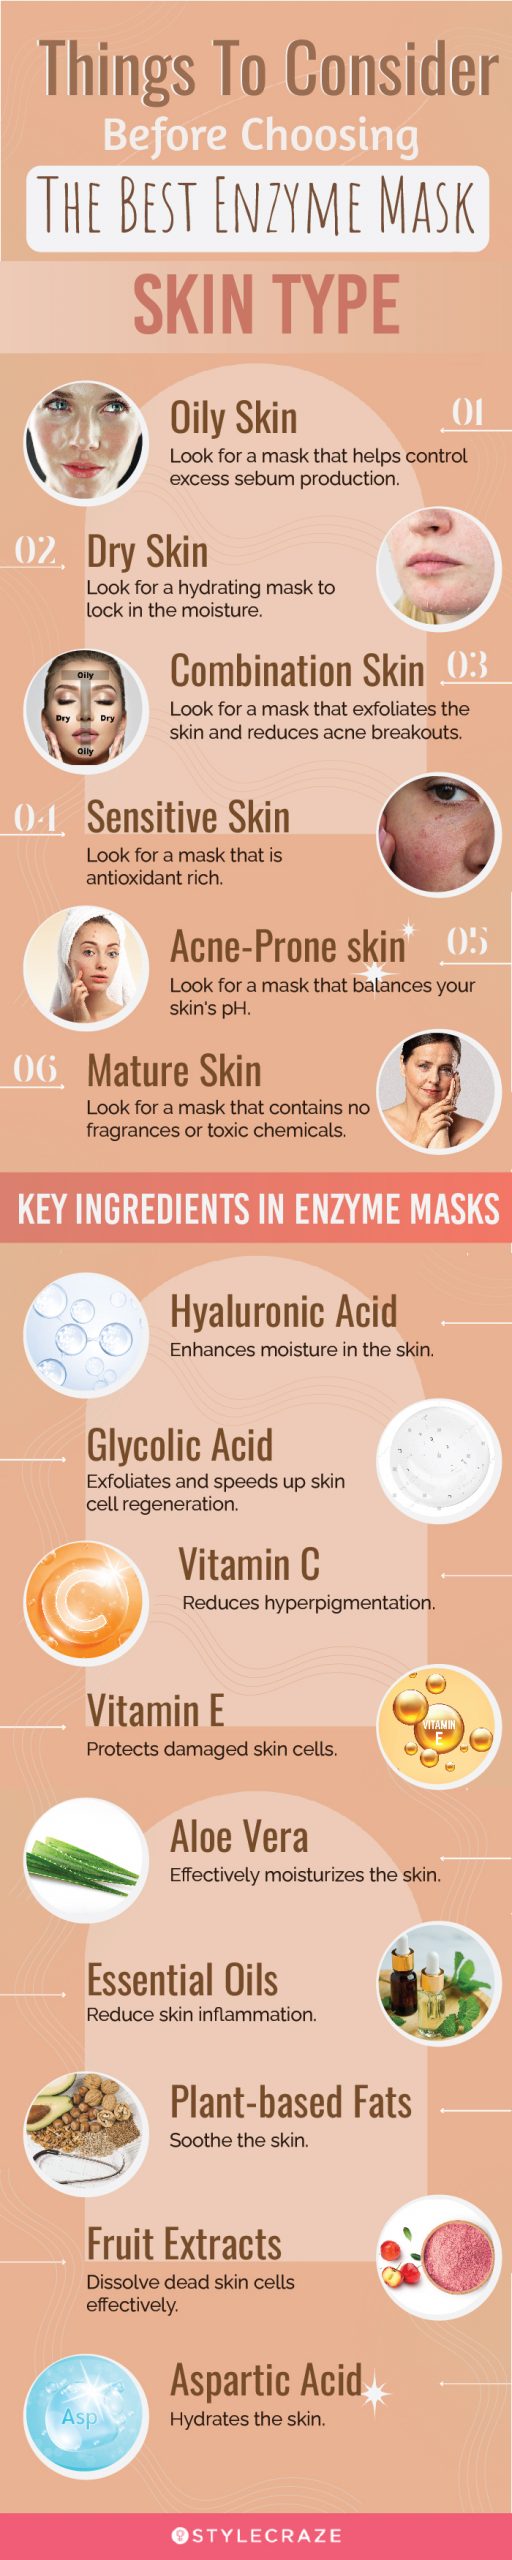 Things To Consider Before Choosing The Best Enzyme Mask (infographic)